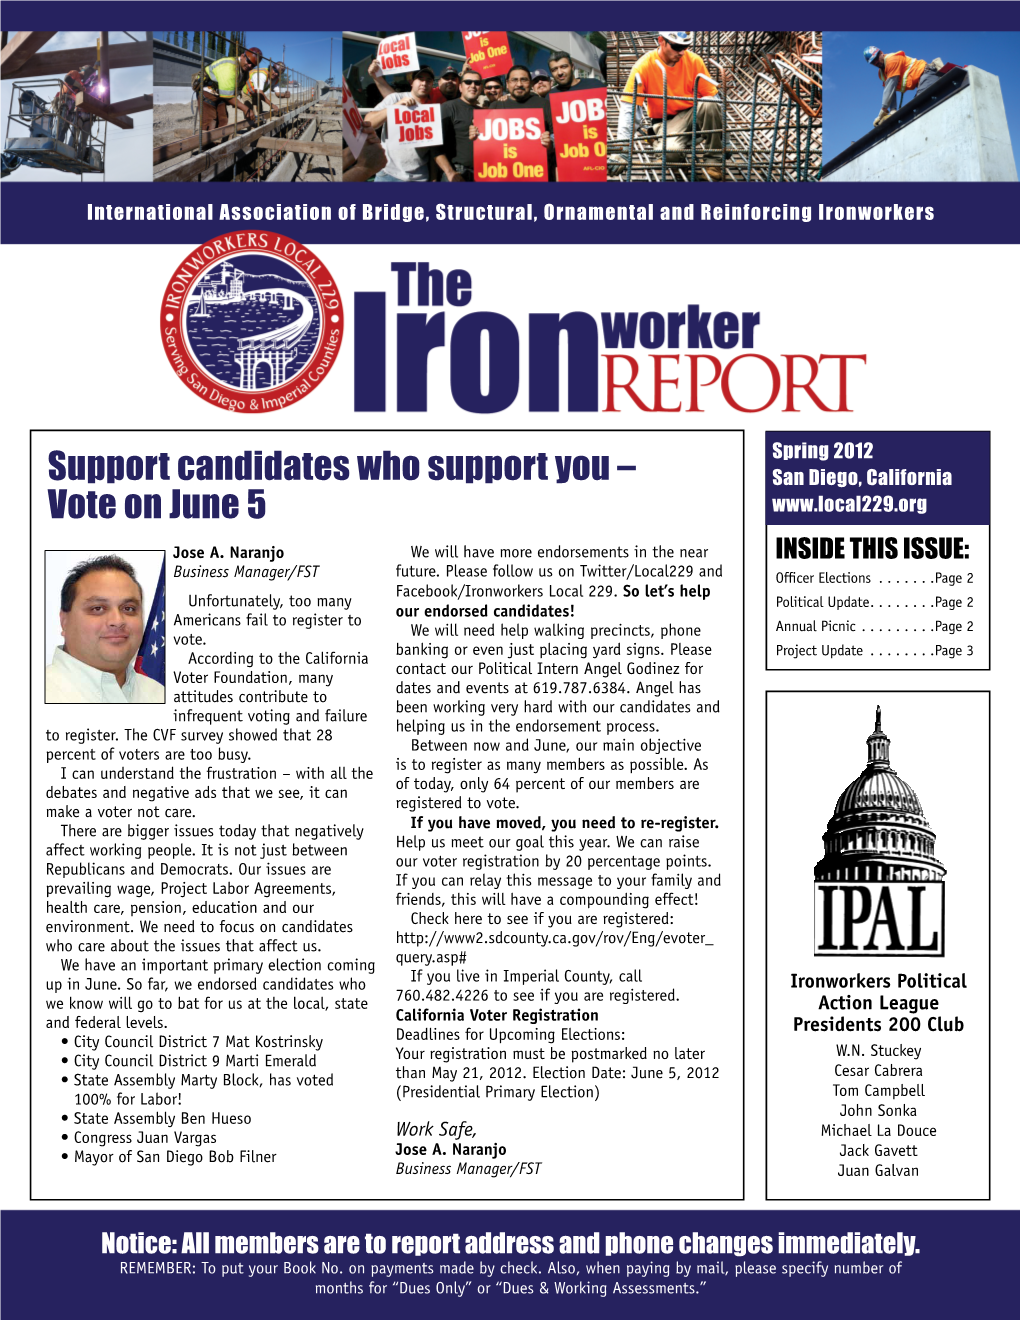 Support Candidates Who Support You – Vote on June 5